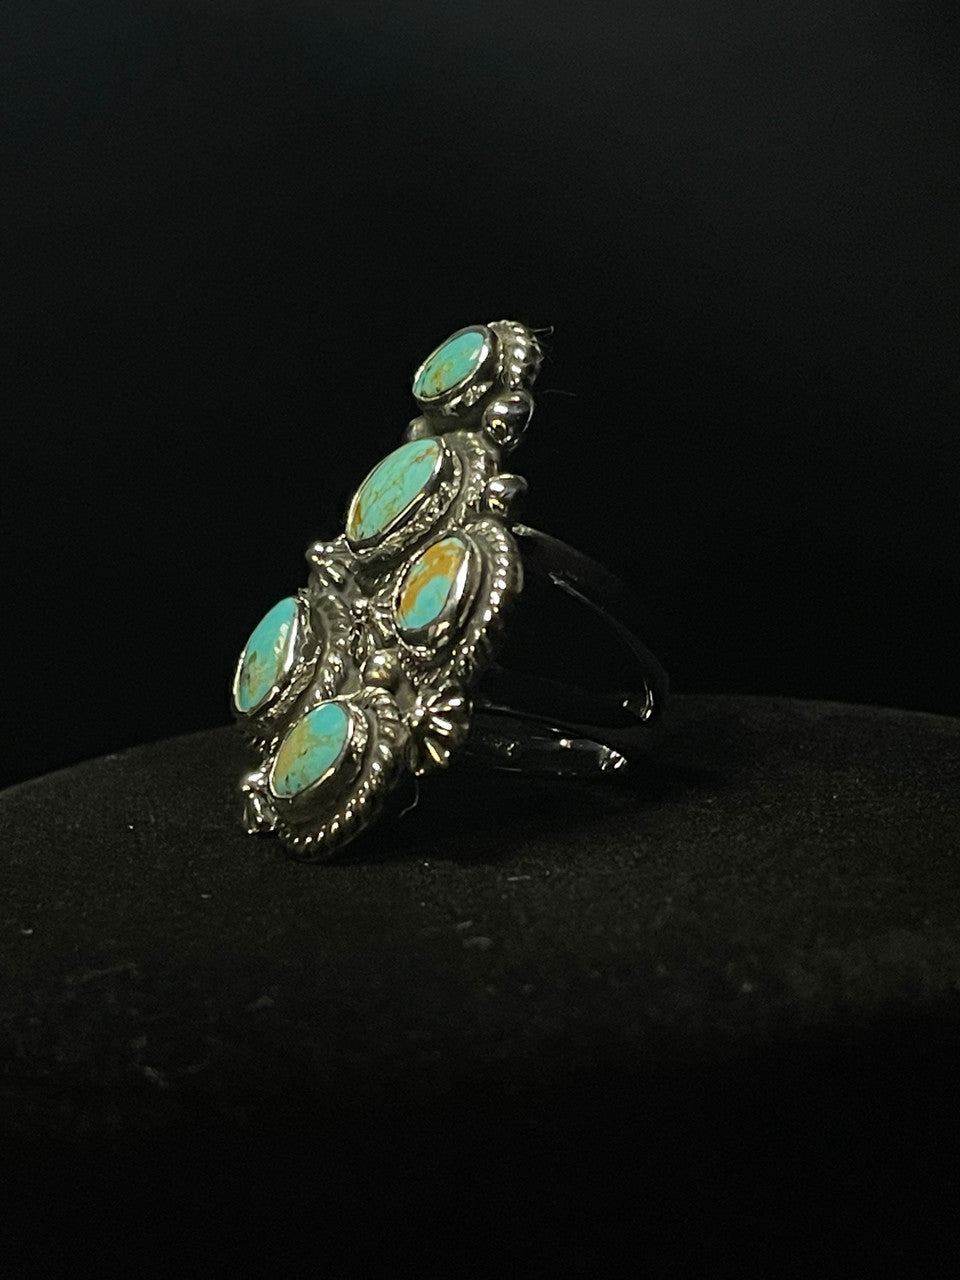 Turquoise & Silver Ring - Southwest Indian Foundation - 2959